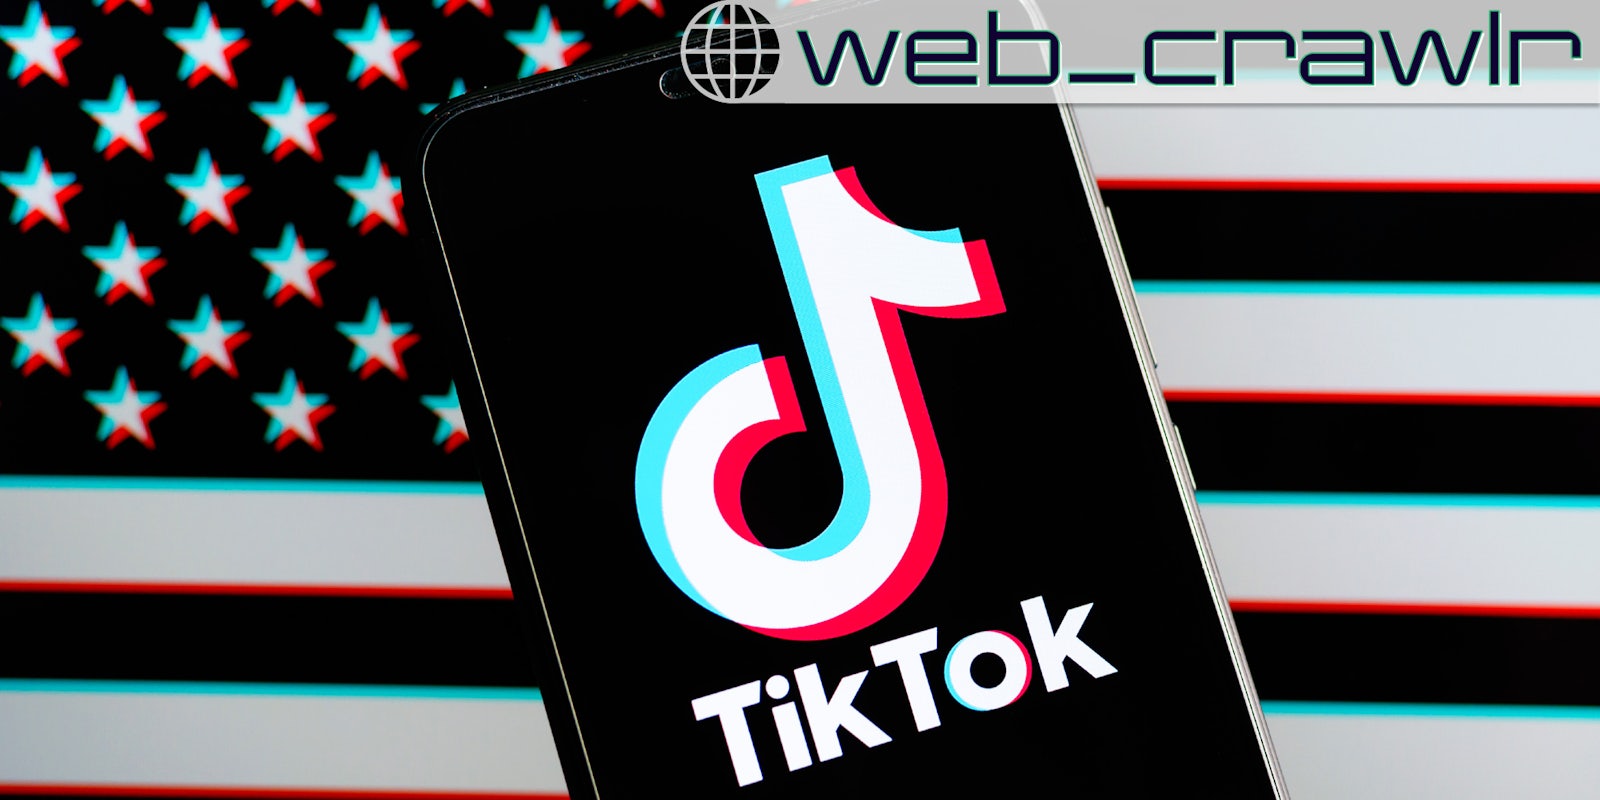 A phone with the TikTok logo on it. The American flag is in the background. The Daily Dot newsletter web_crawlr logo is in the top right corner.